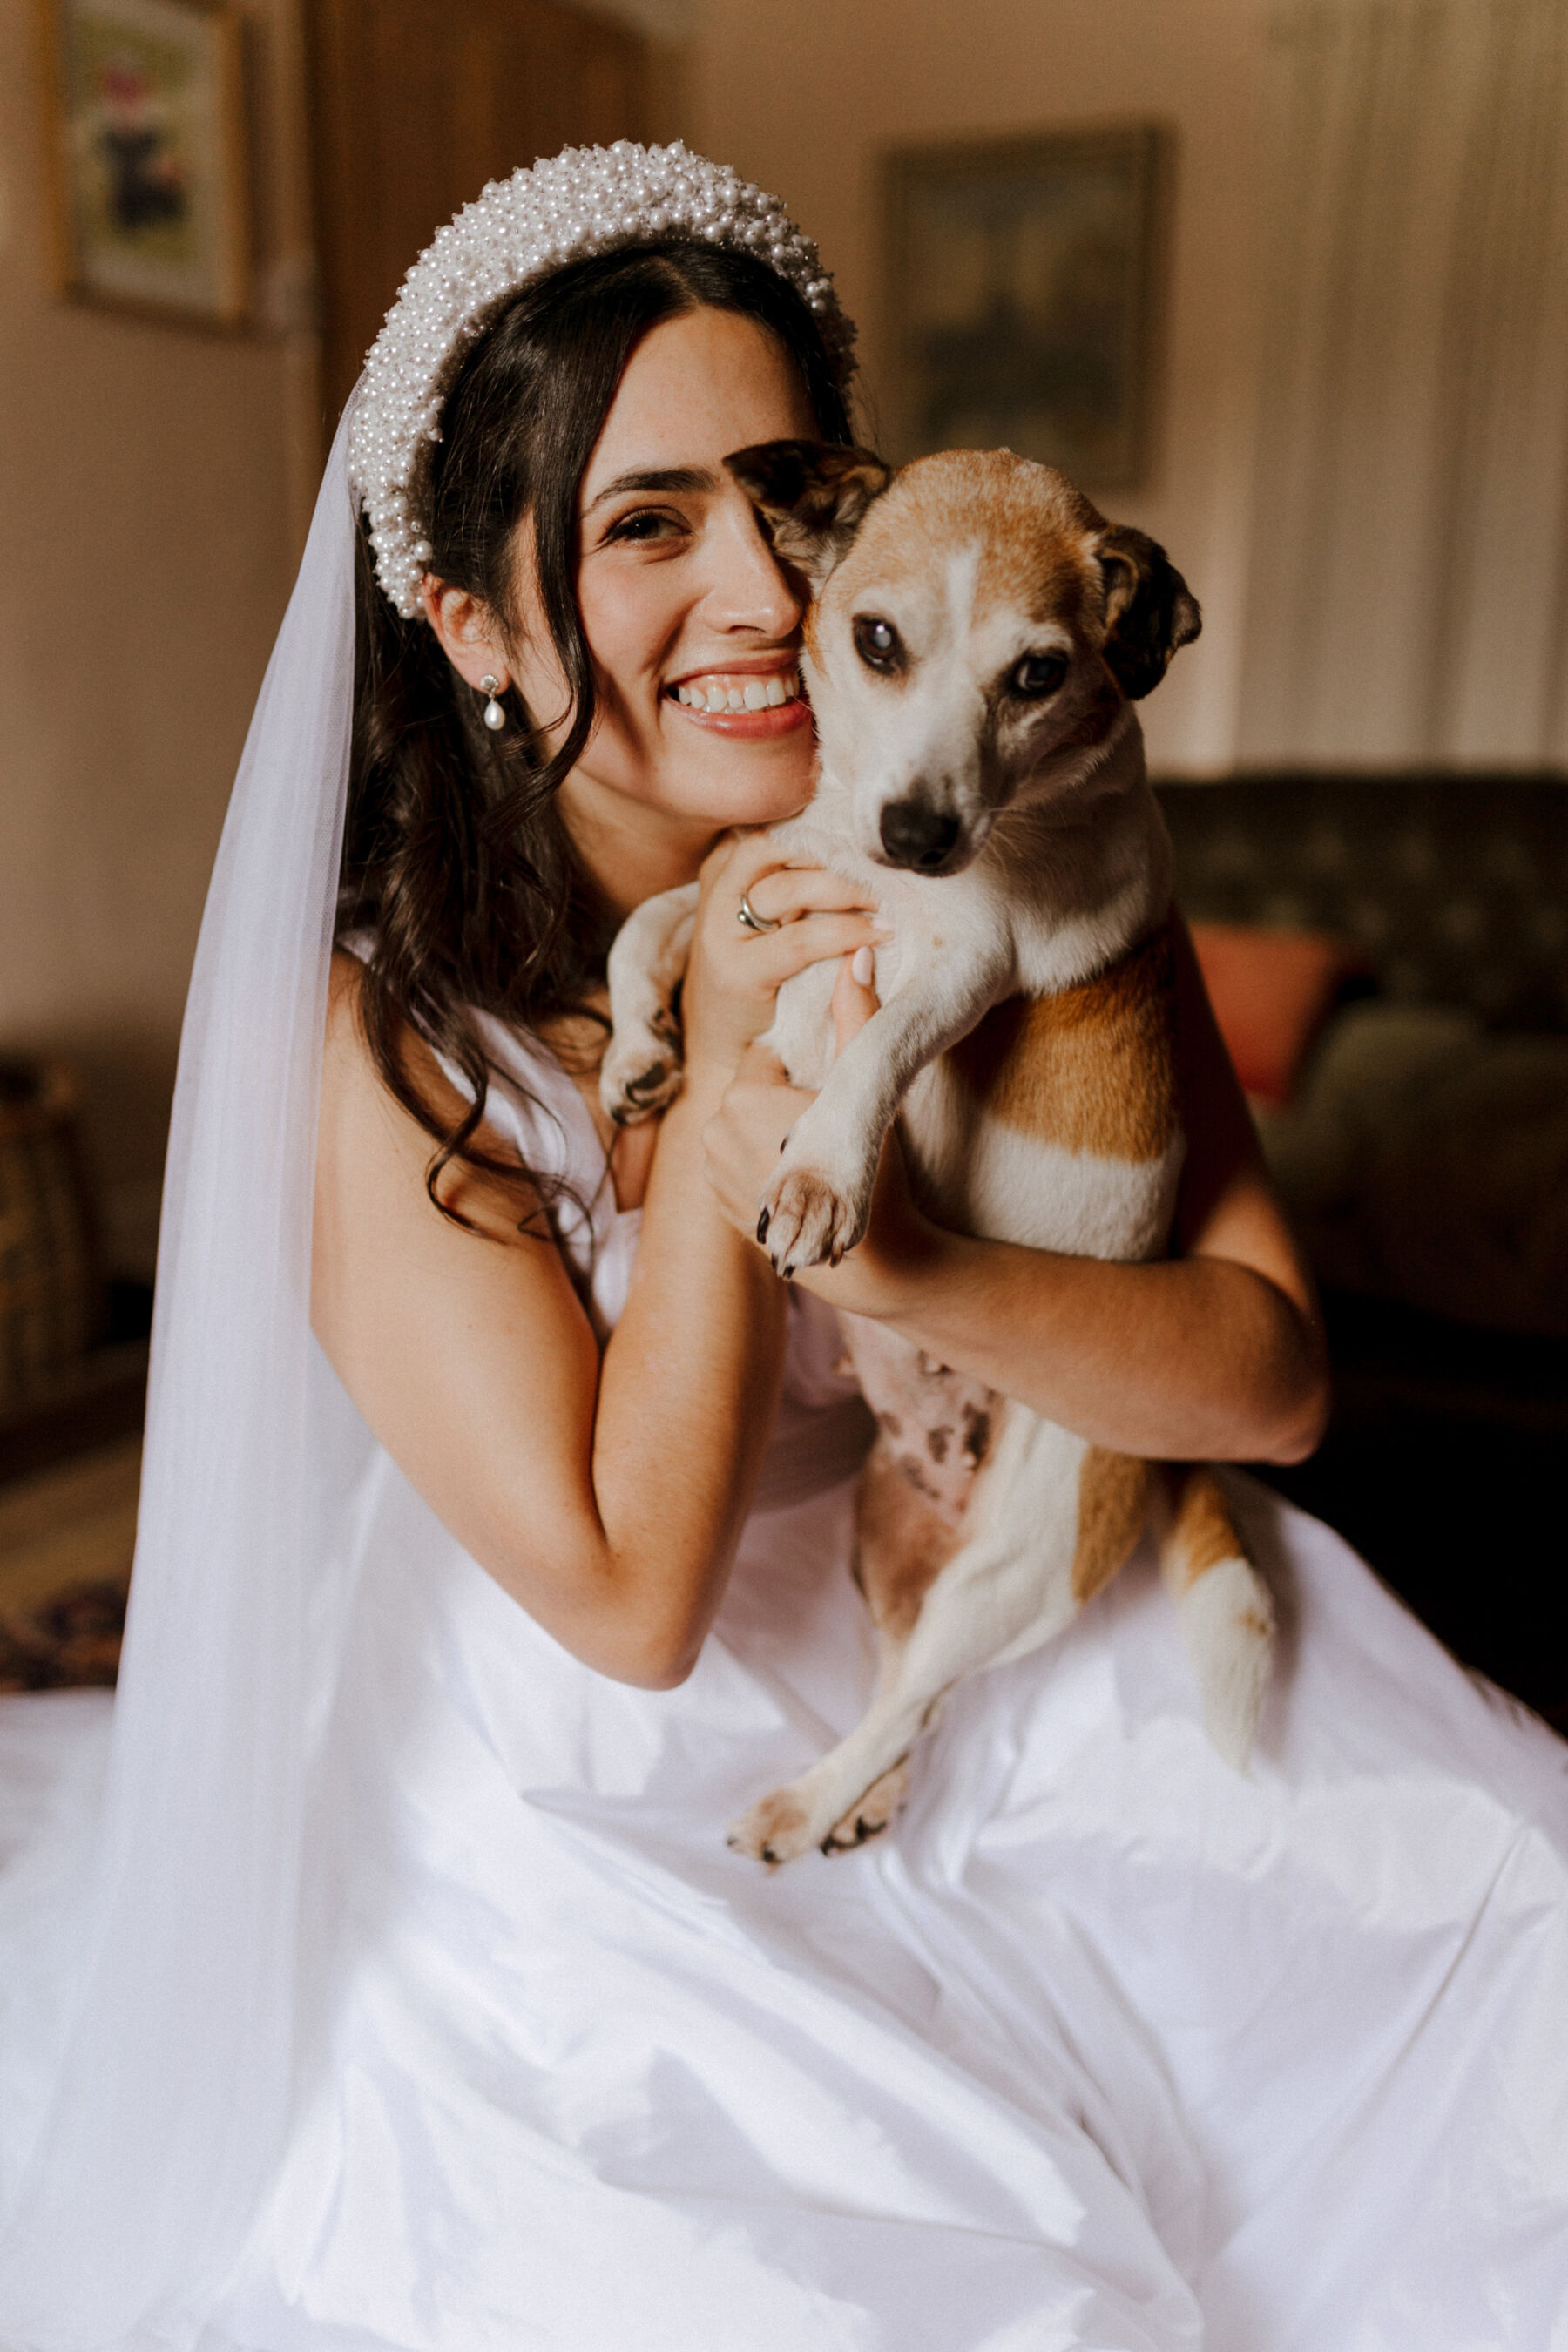 Bride wearing a pearl headband, veil and a Jessica Bennett wedding dress whilst holding her little dog on her lap.